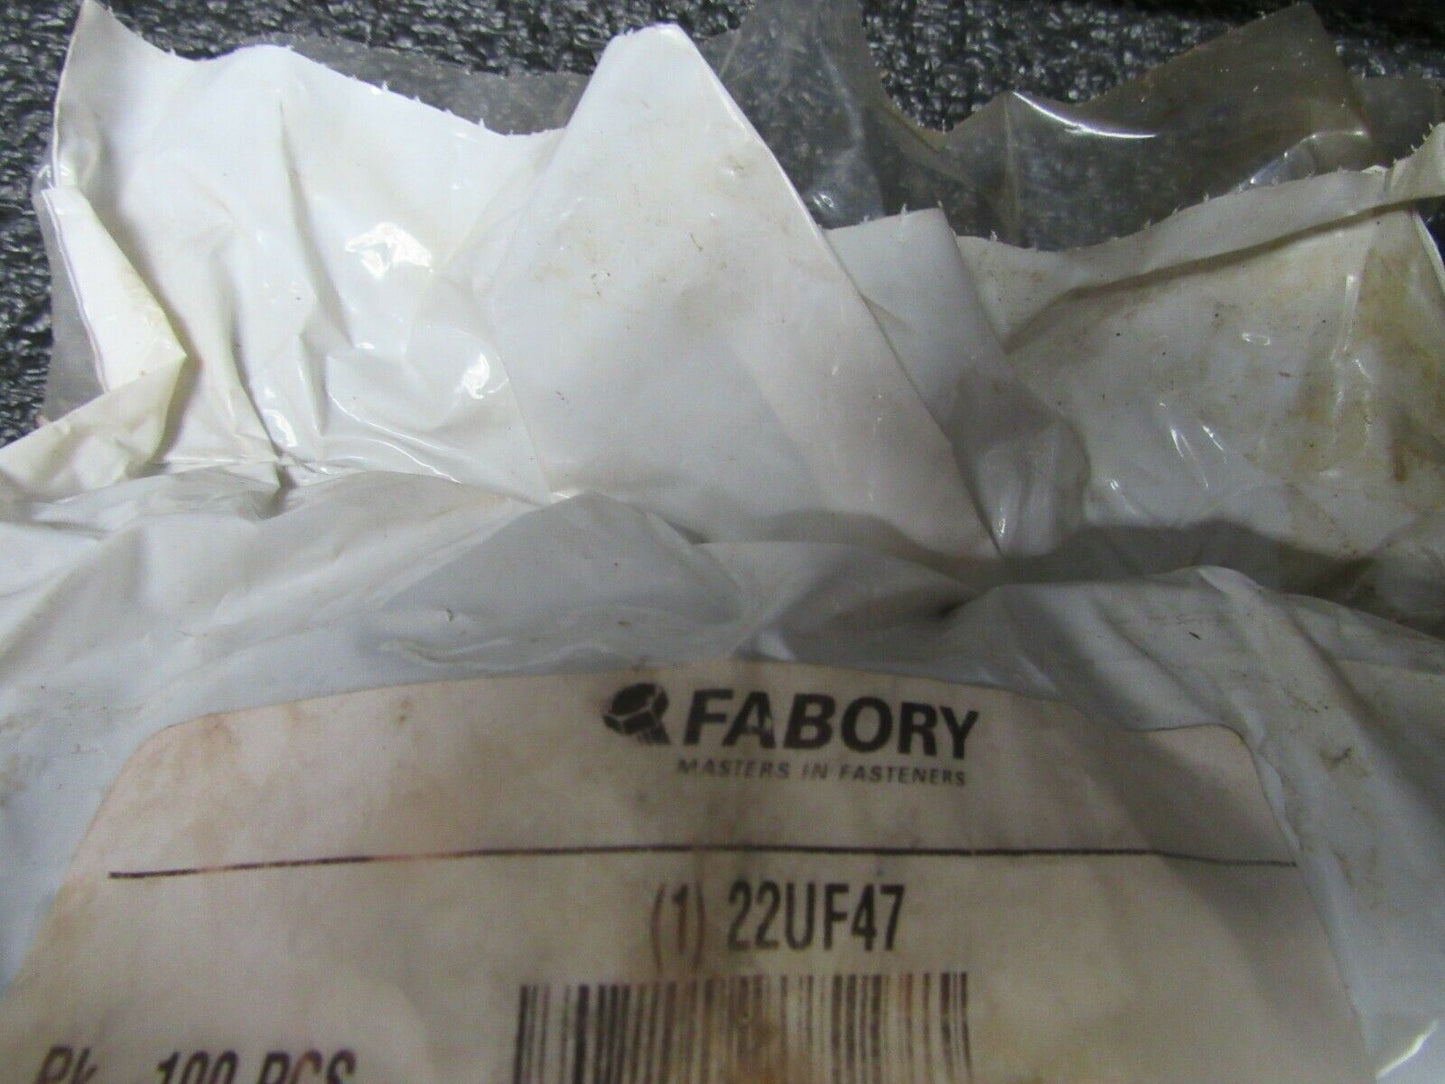 FABORY 5/16" x 3" O.D., Fender Washer, Steel, Low Carbon, Zinc Plated, PK100, (184290686164-BT50)